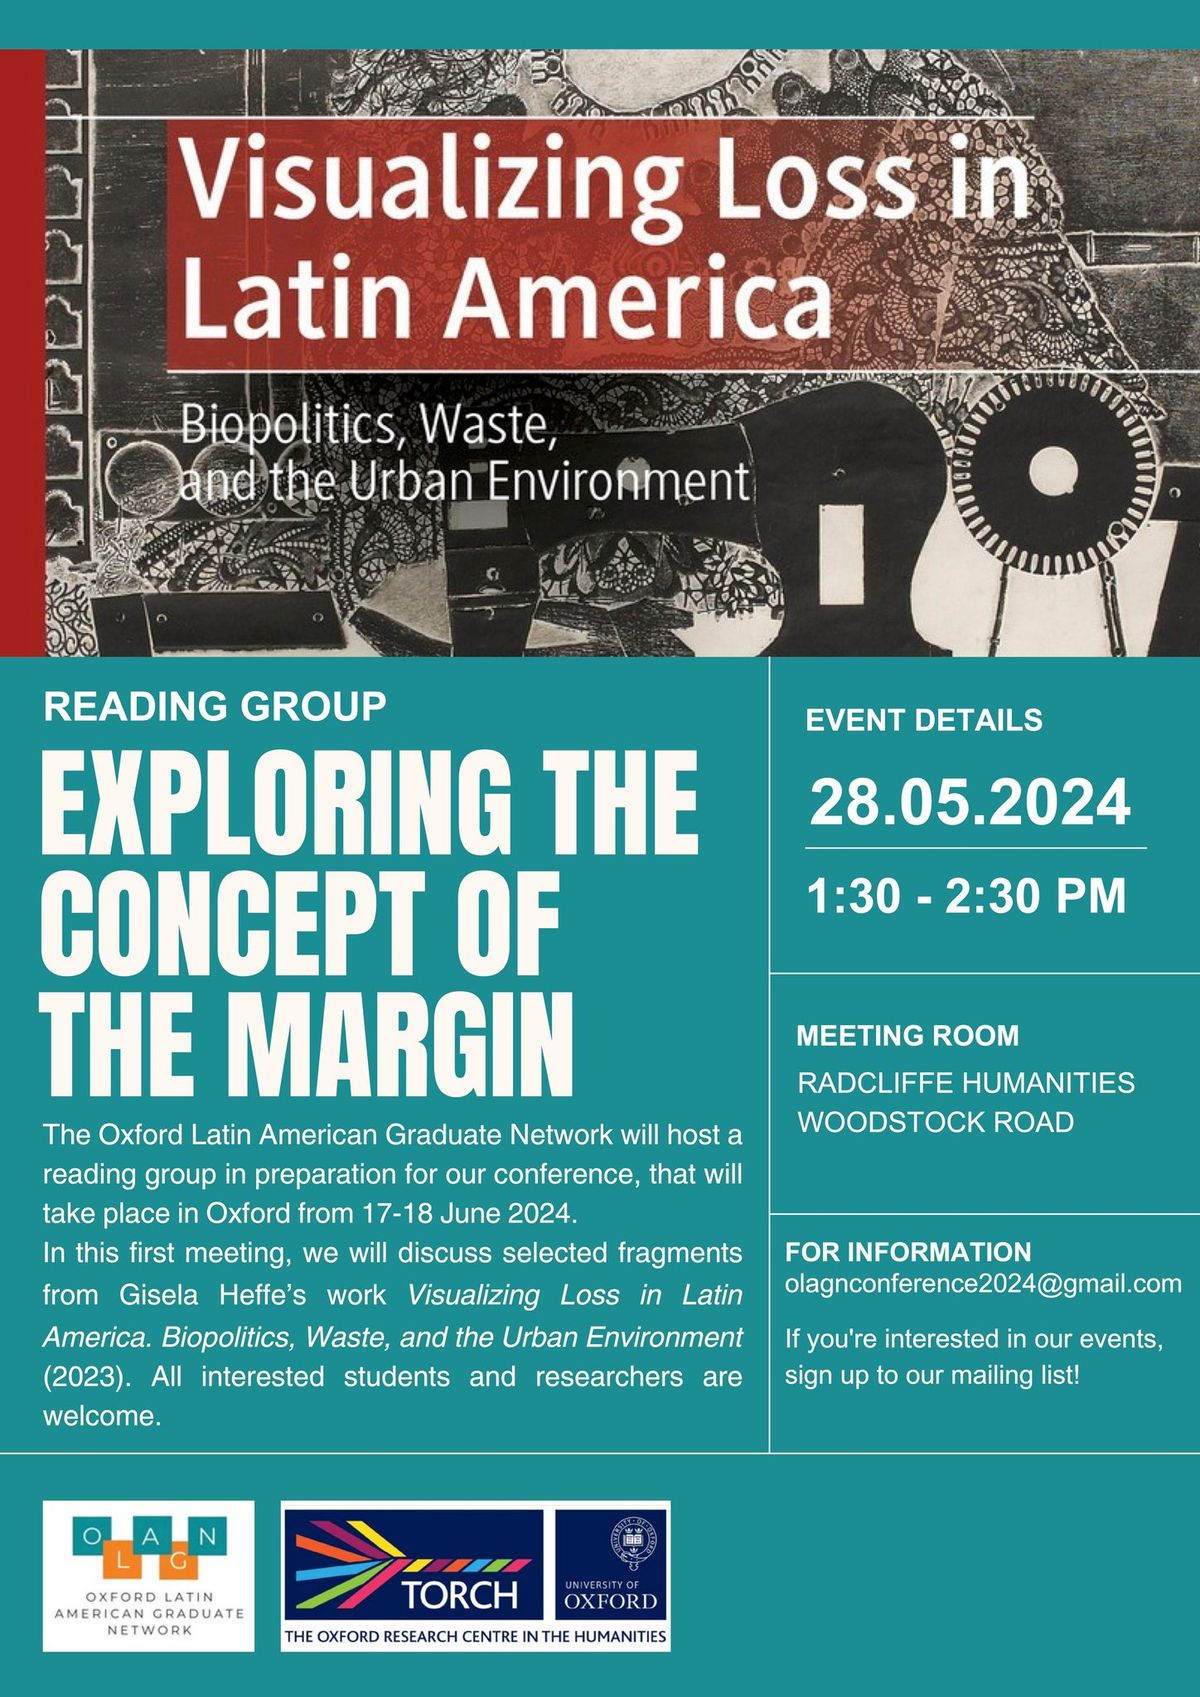 Reading Group: Visualizing Loss in Latin America. Biopolitics, Waste, and the Urban Environment